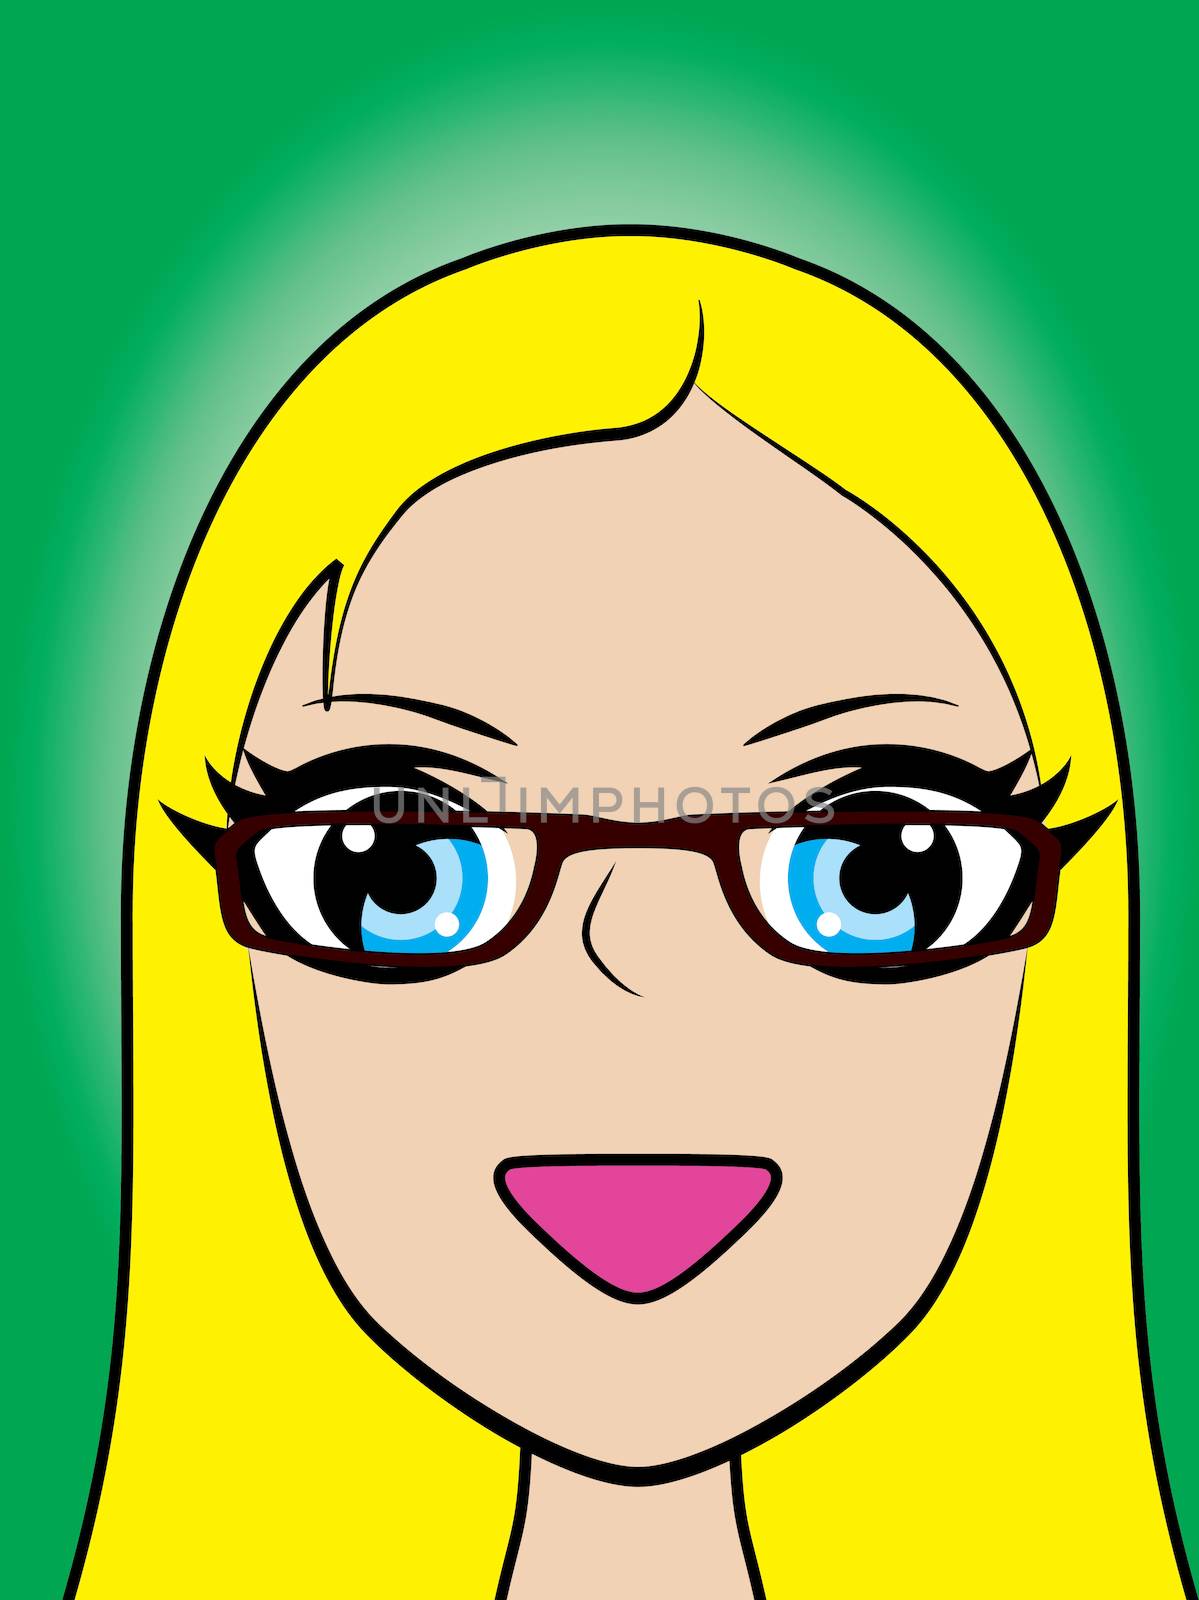 Illustration of Pop art style womans face with space for text by DragonEyeMedia